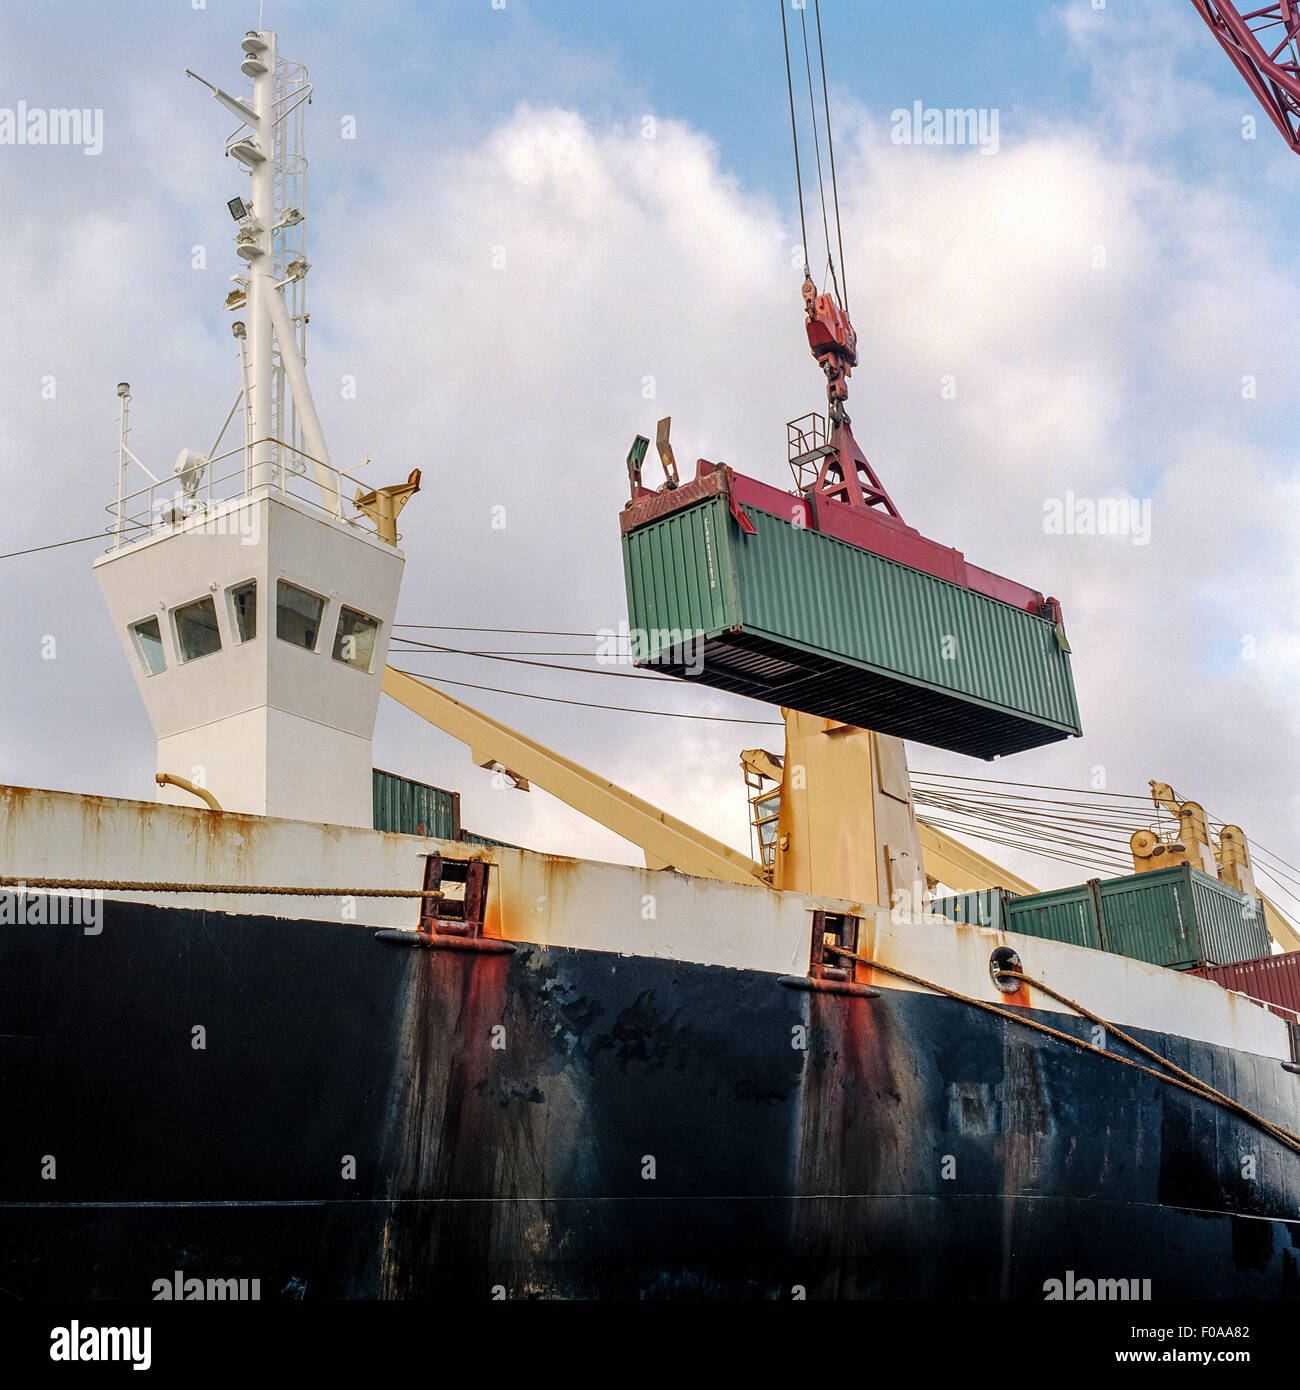 Shipping container being lowered by crane onto ship in port Stock Photo